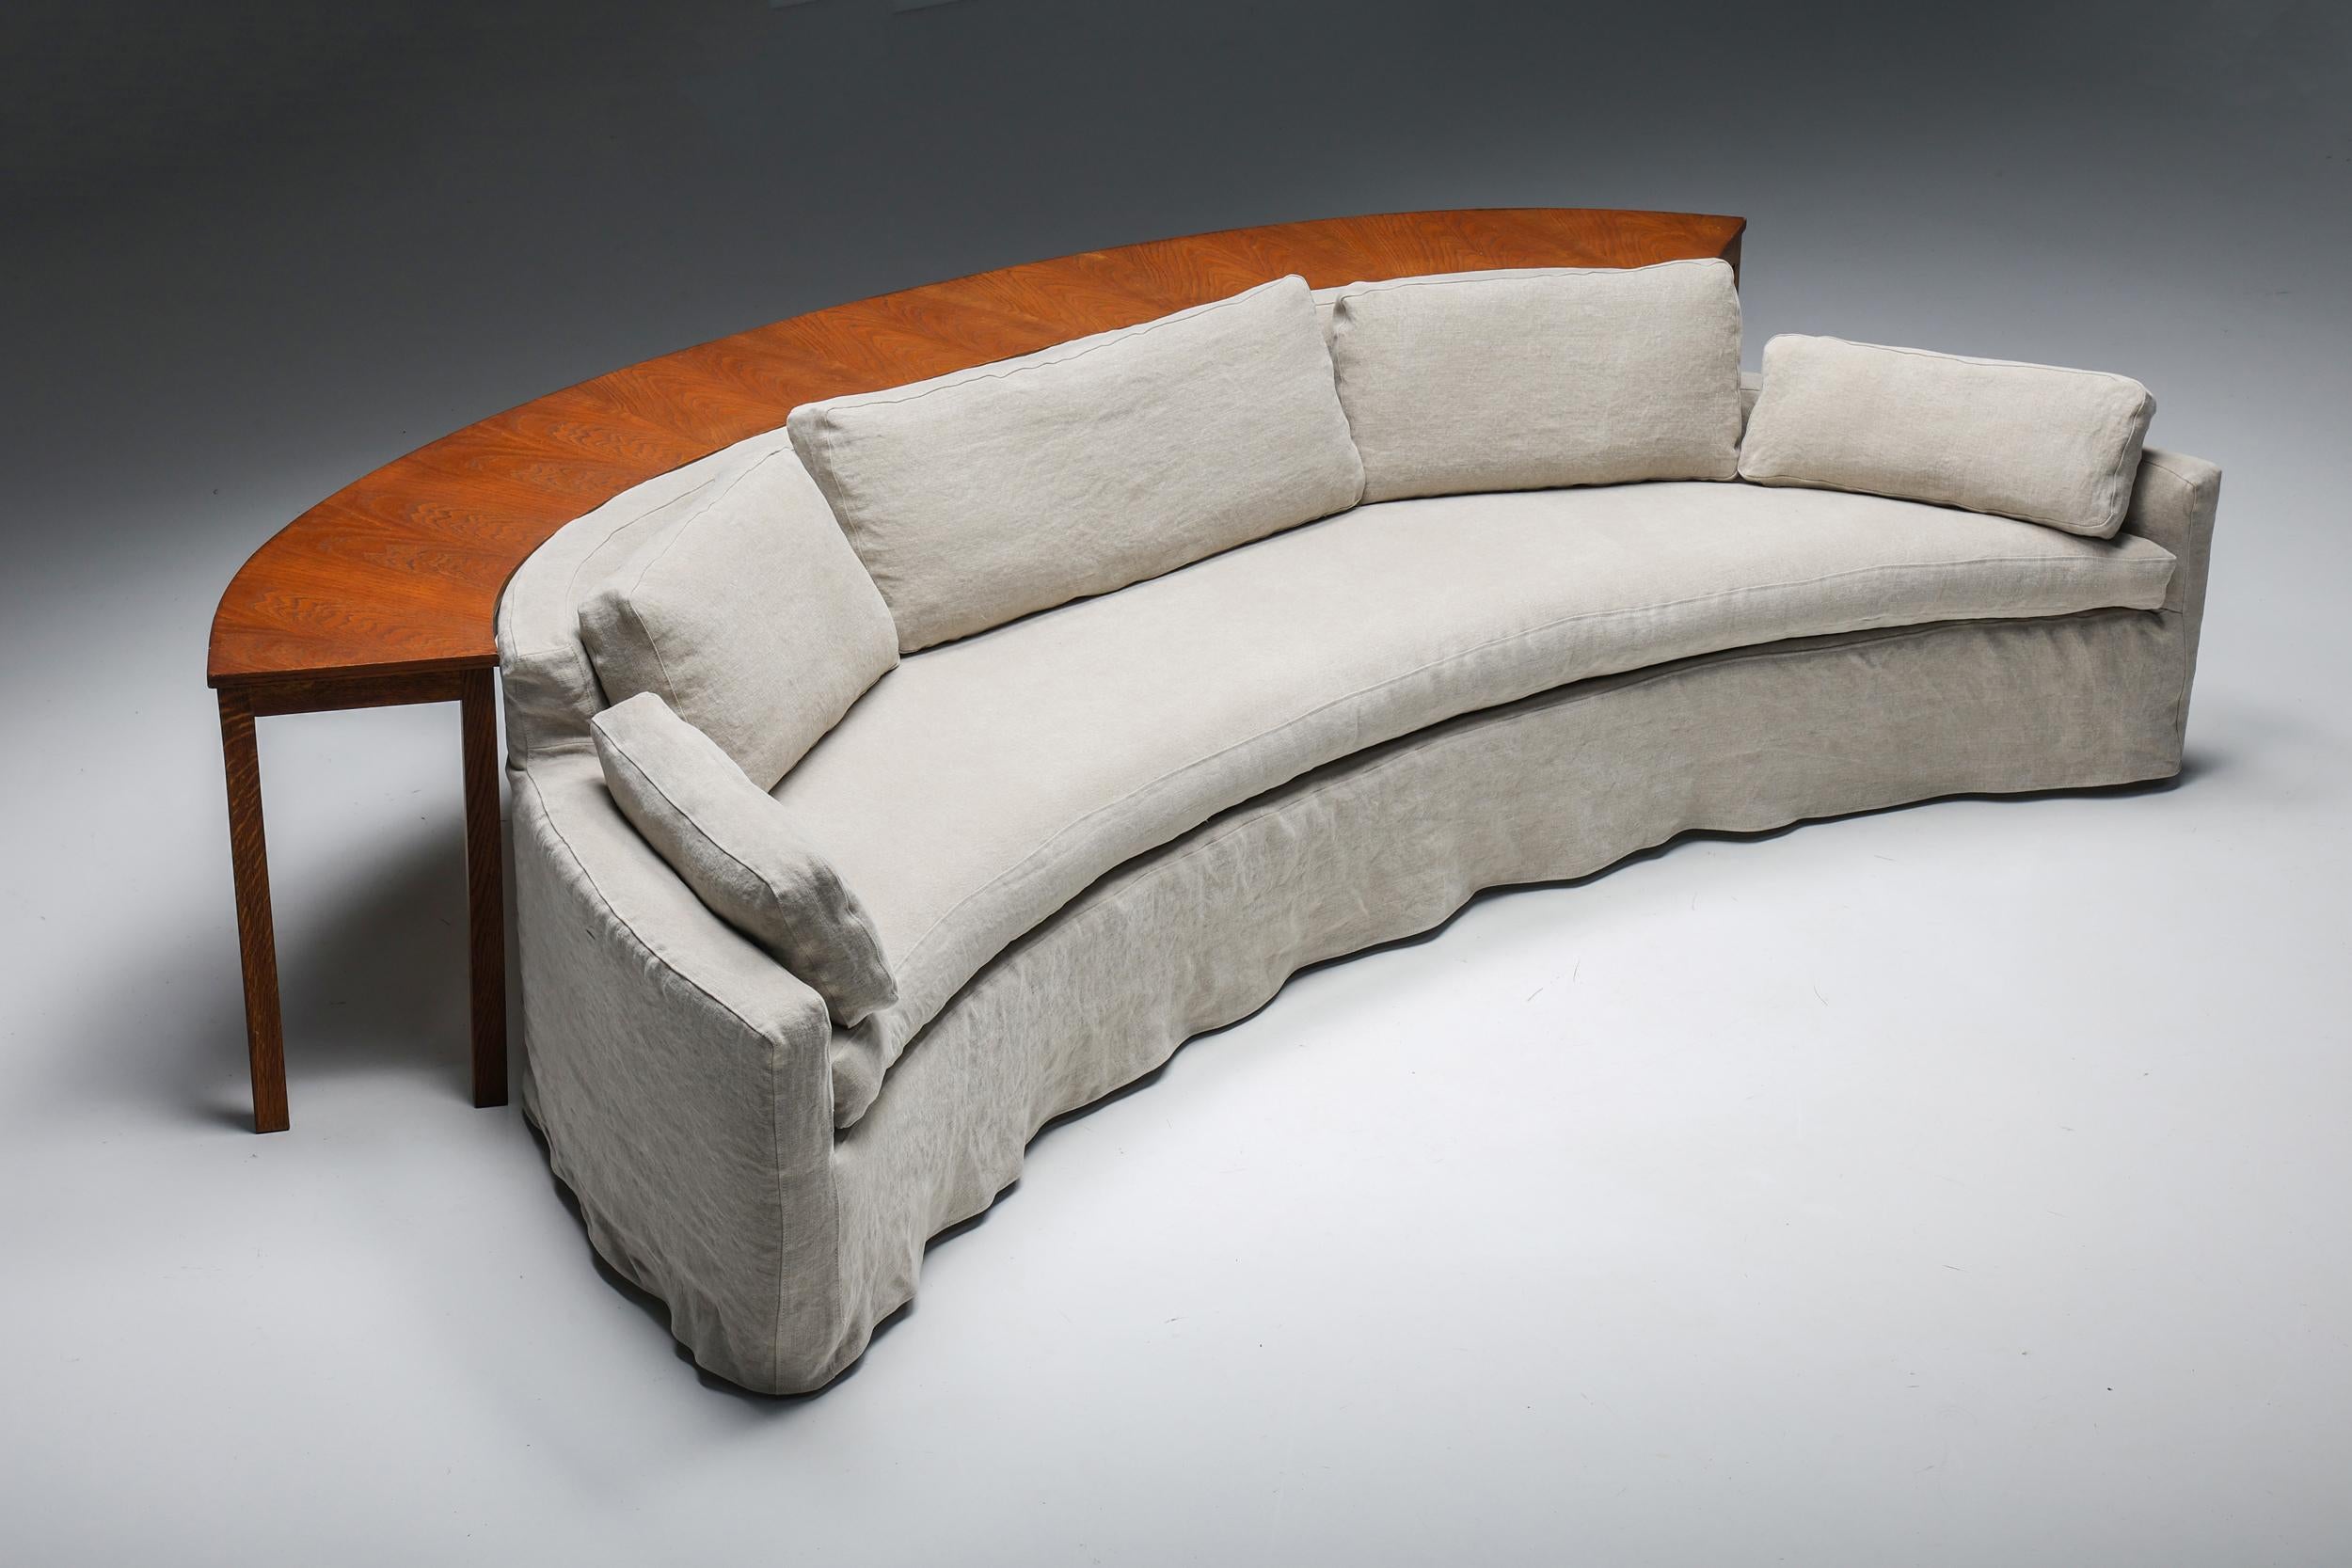 Curved Sofa; Adrian Pearsall; USA; American Design; Mid-Century Modern; Walnut: Settee; Baker Furniture, USA, 1950s.

This rare sofa in the style of American designer Adrian Pearsall was manufactured by Baker Furniture in the USA in the 1950s.